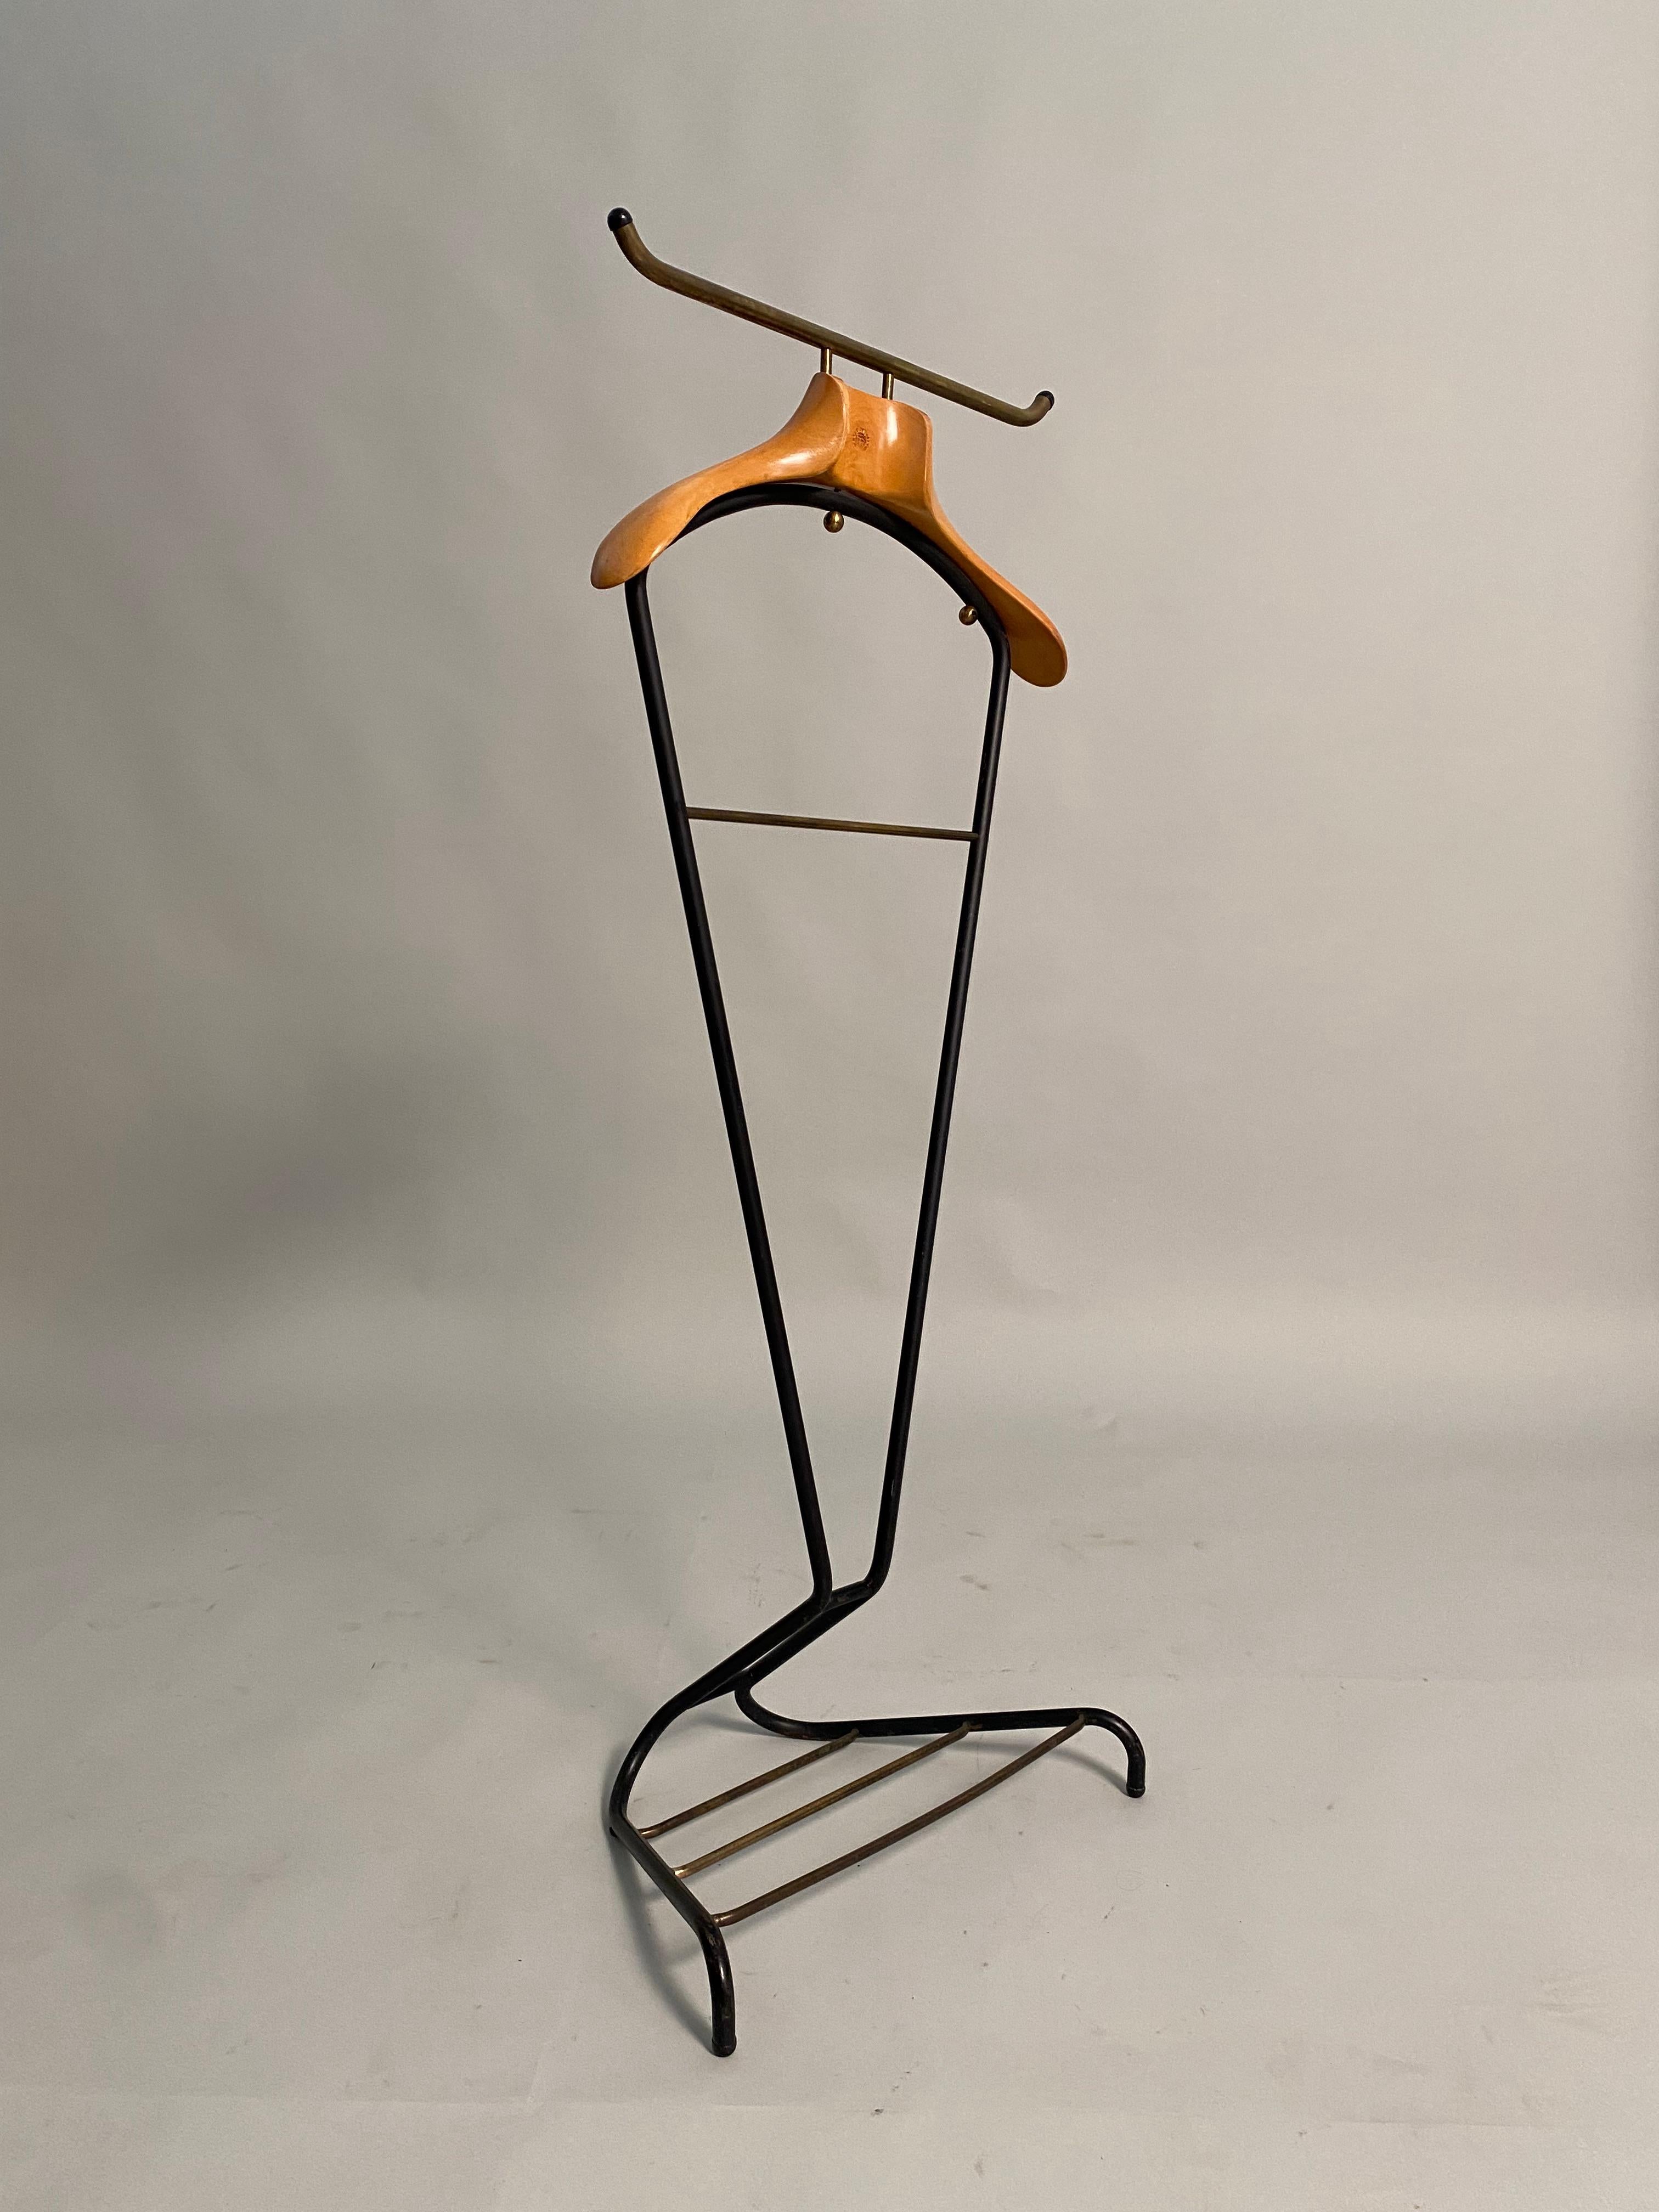 Rare and very elegant Mid-Century Organic coat stand, made for the Fratelli Reguitti company on a probable design by Ico Parisi, who worked permanently for the company. The work, in brass wood and painted metal, features the brand name of the famous